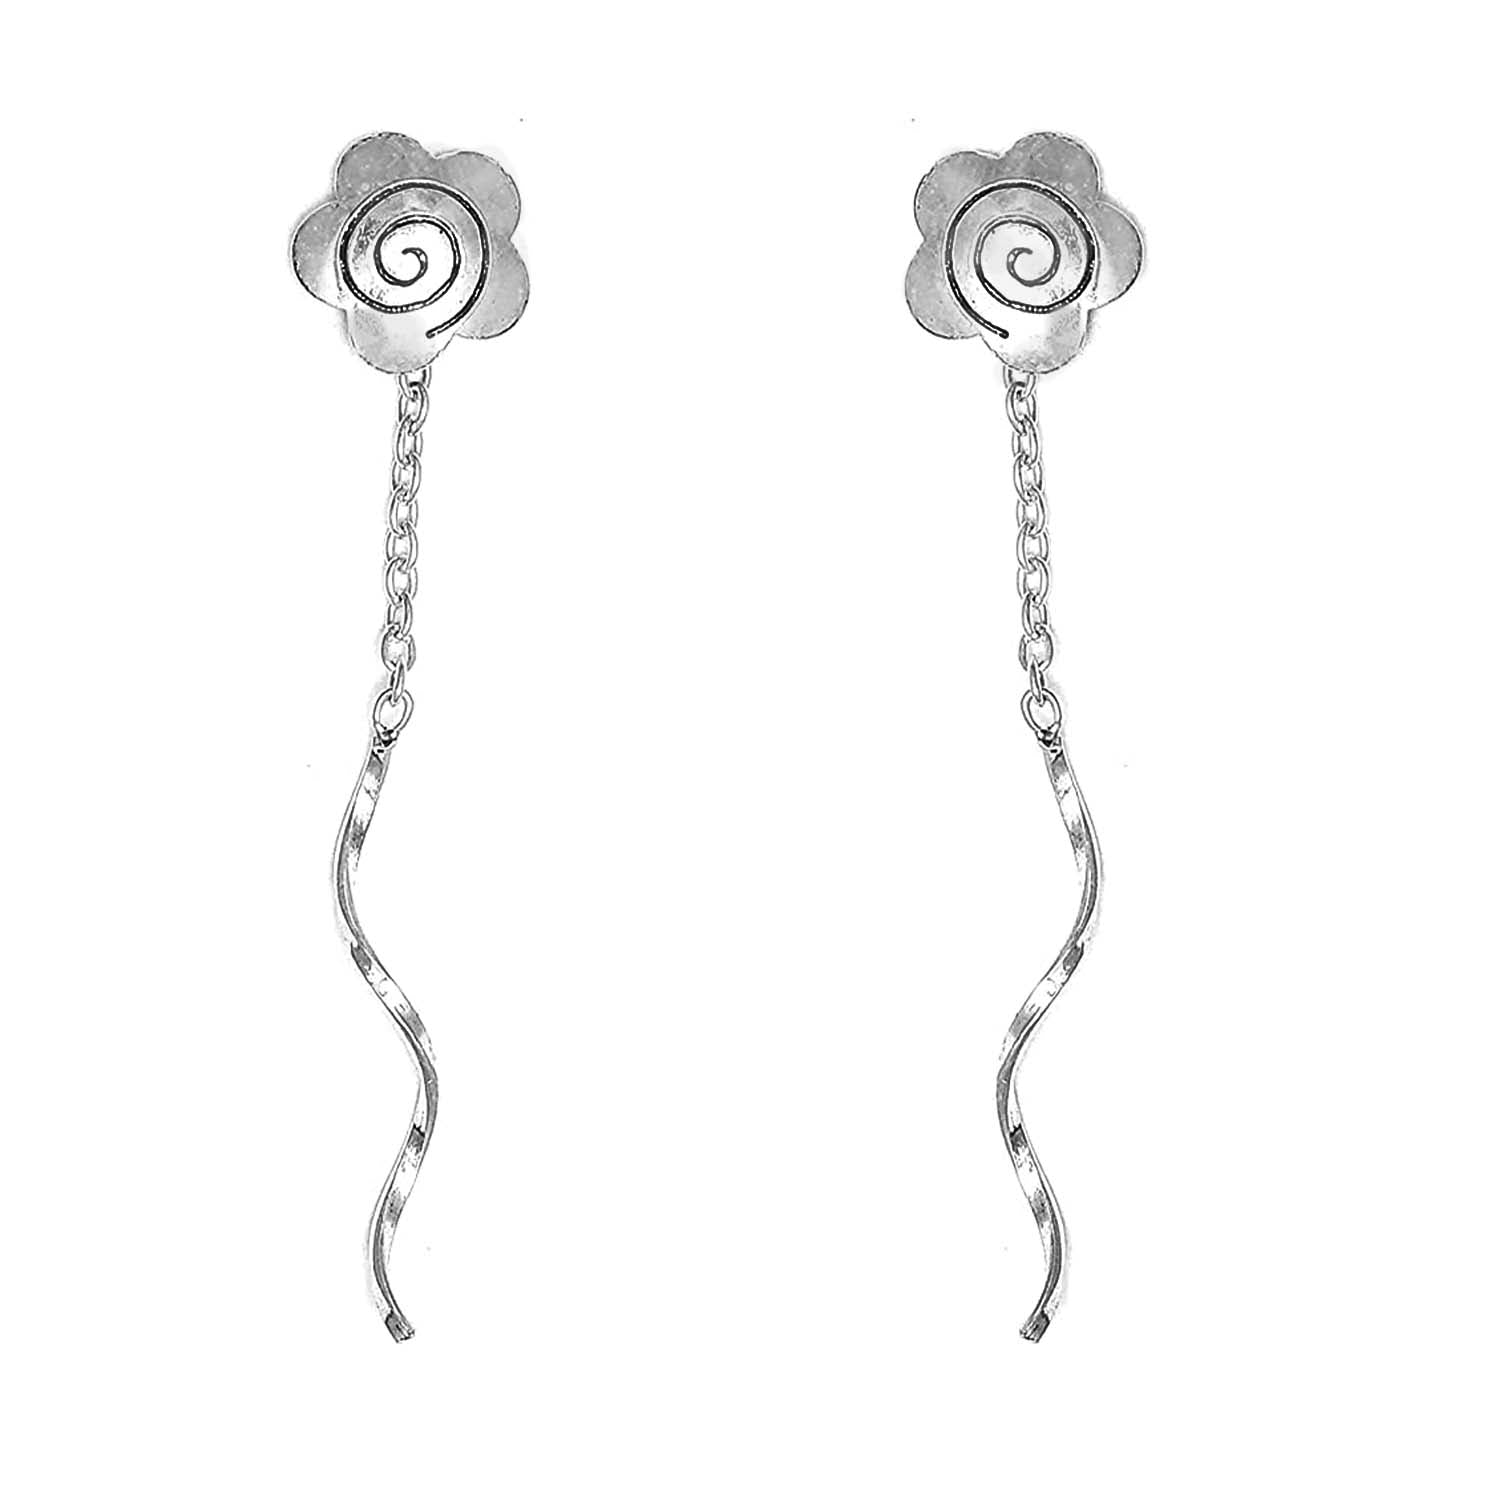 Mystique and magnifique Silver Sui Dhaga 925 Silver Earrings